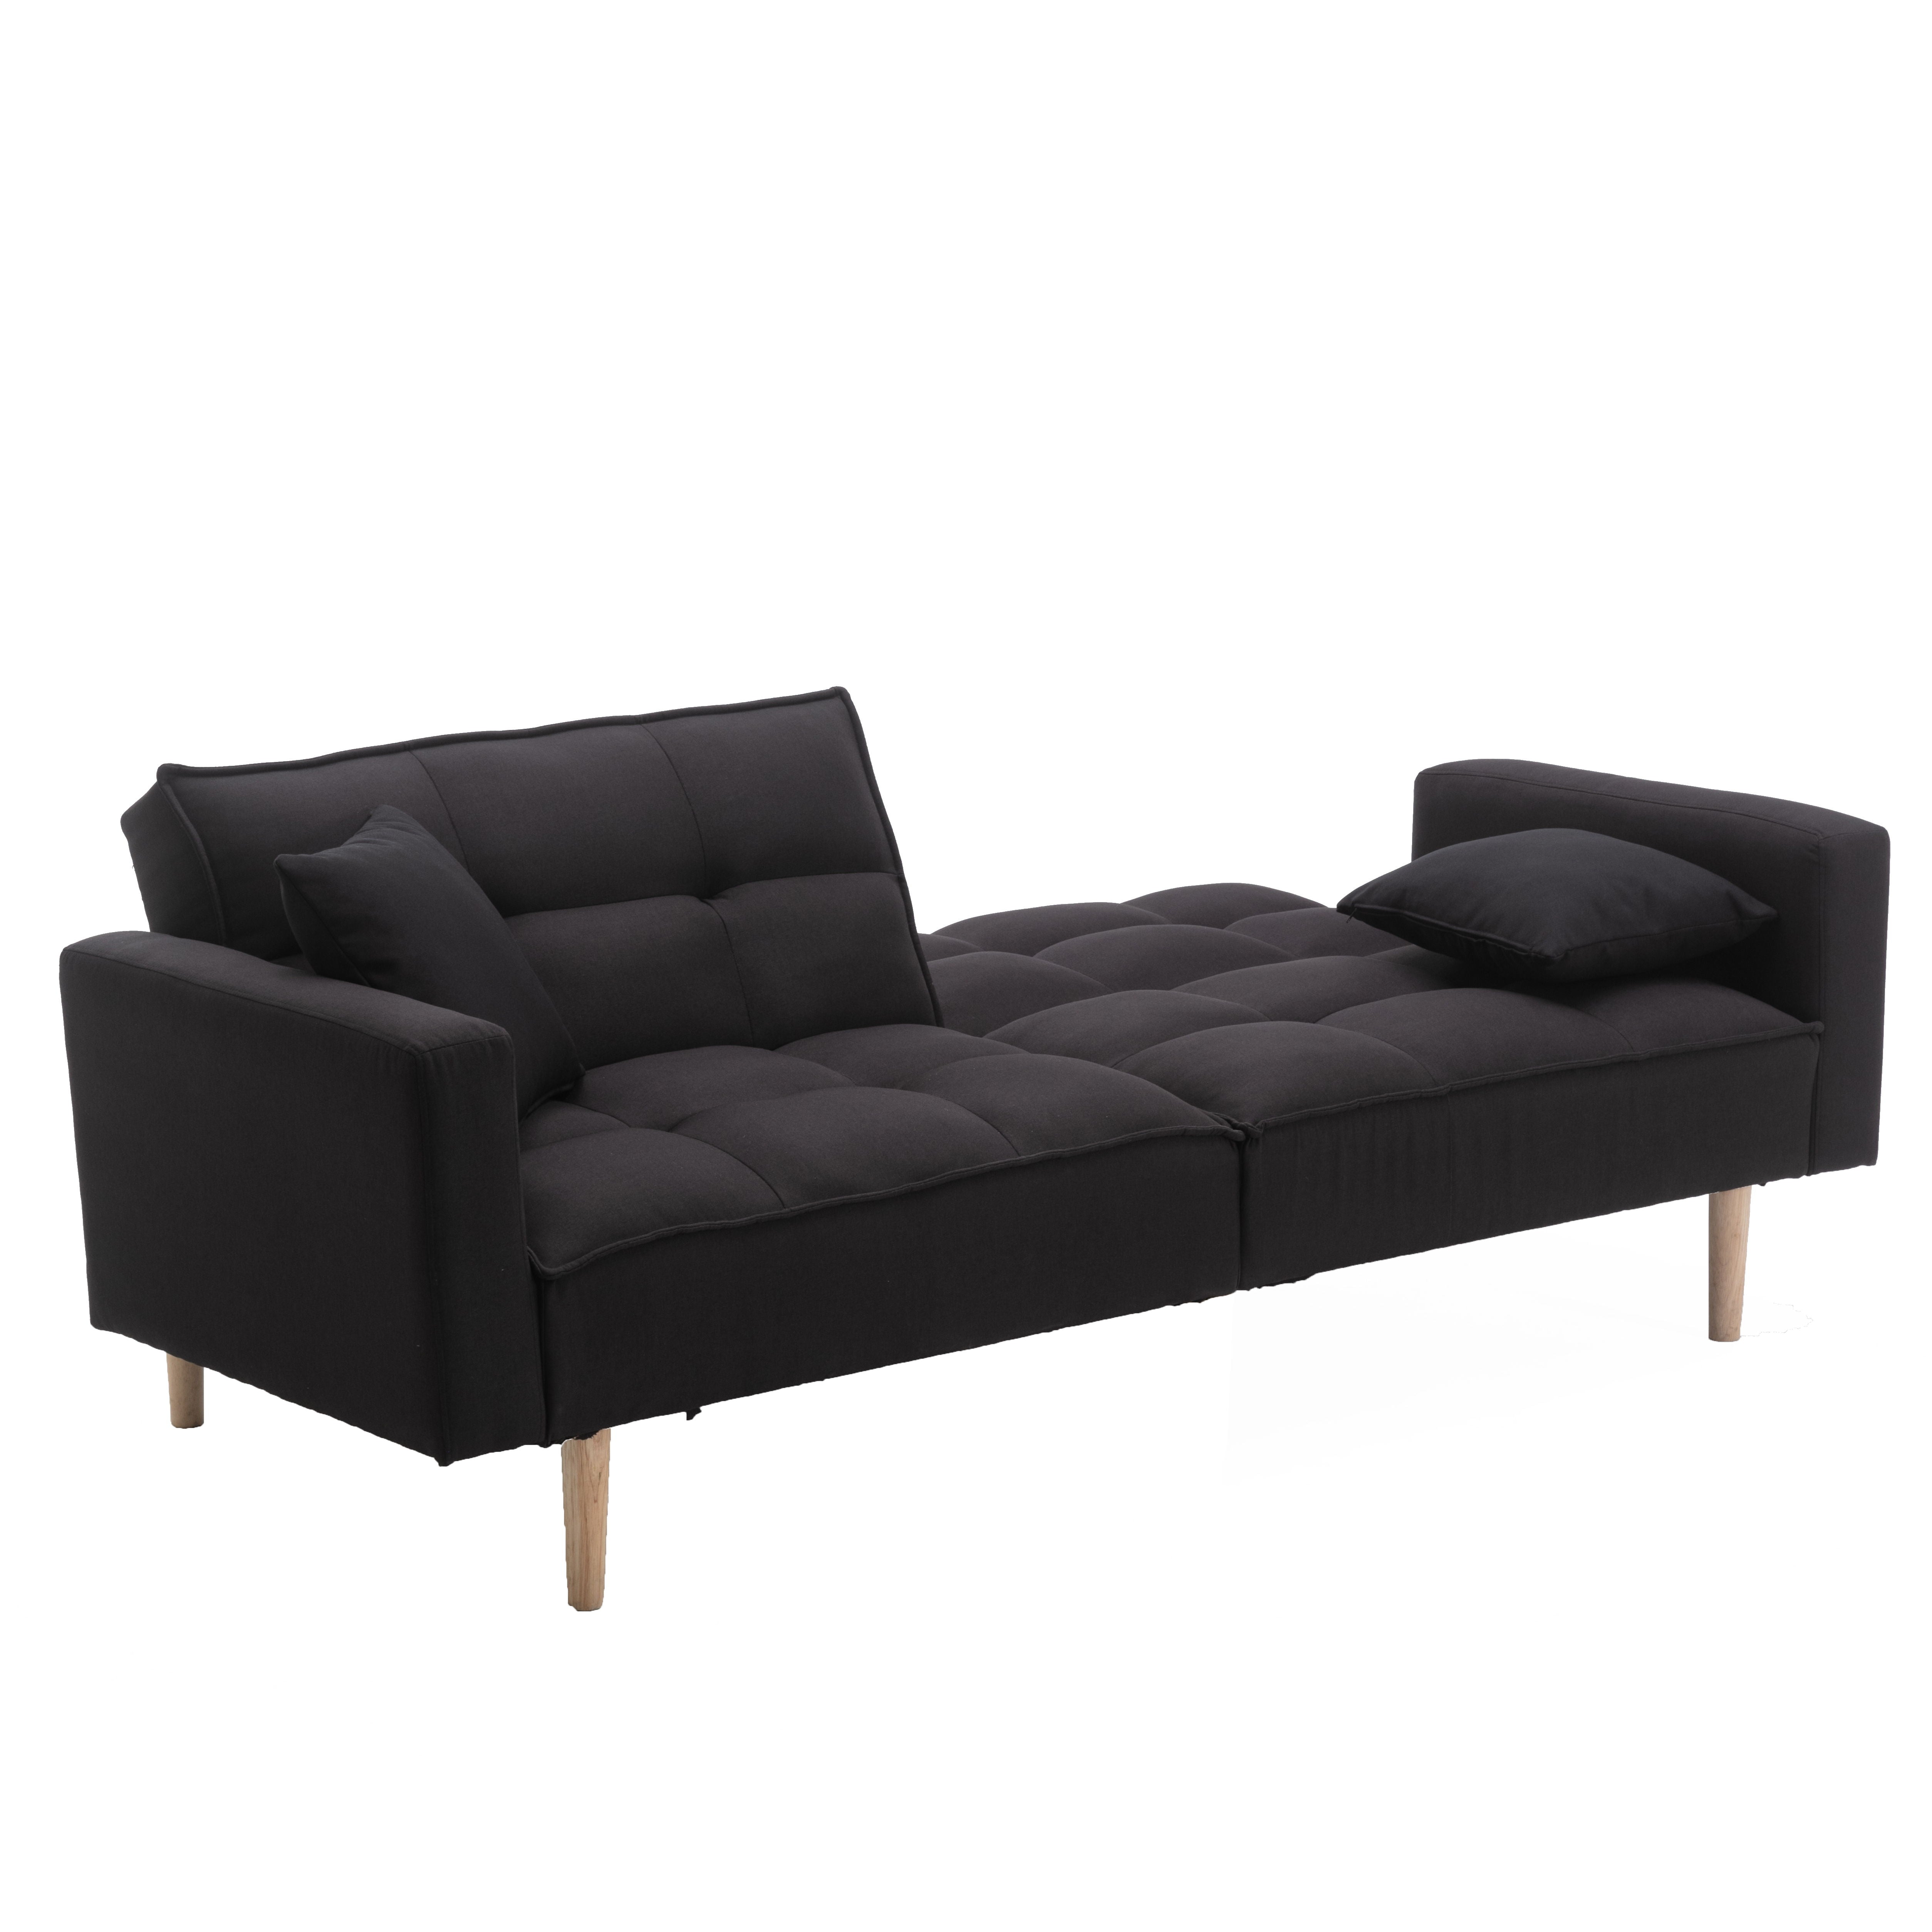 Dongheng Convertible Futon Sofa Bed For Living Room, Linen Sofa With Solid Wooden Legs, Black